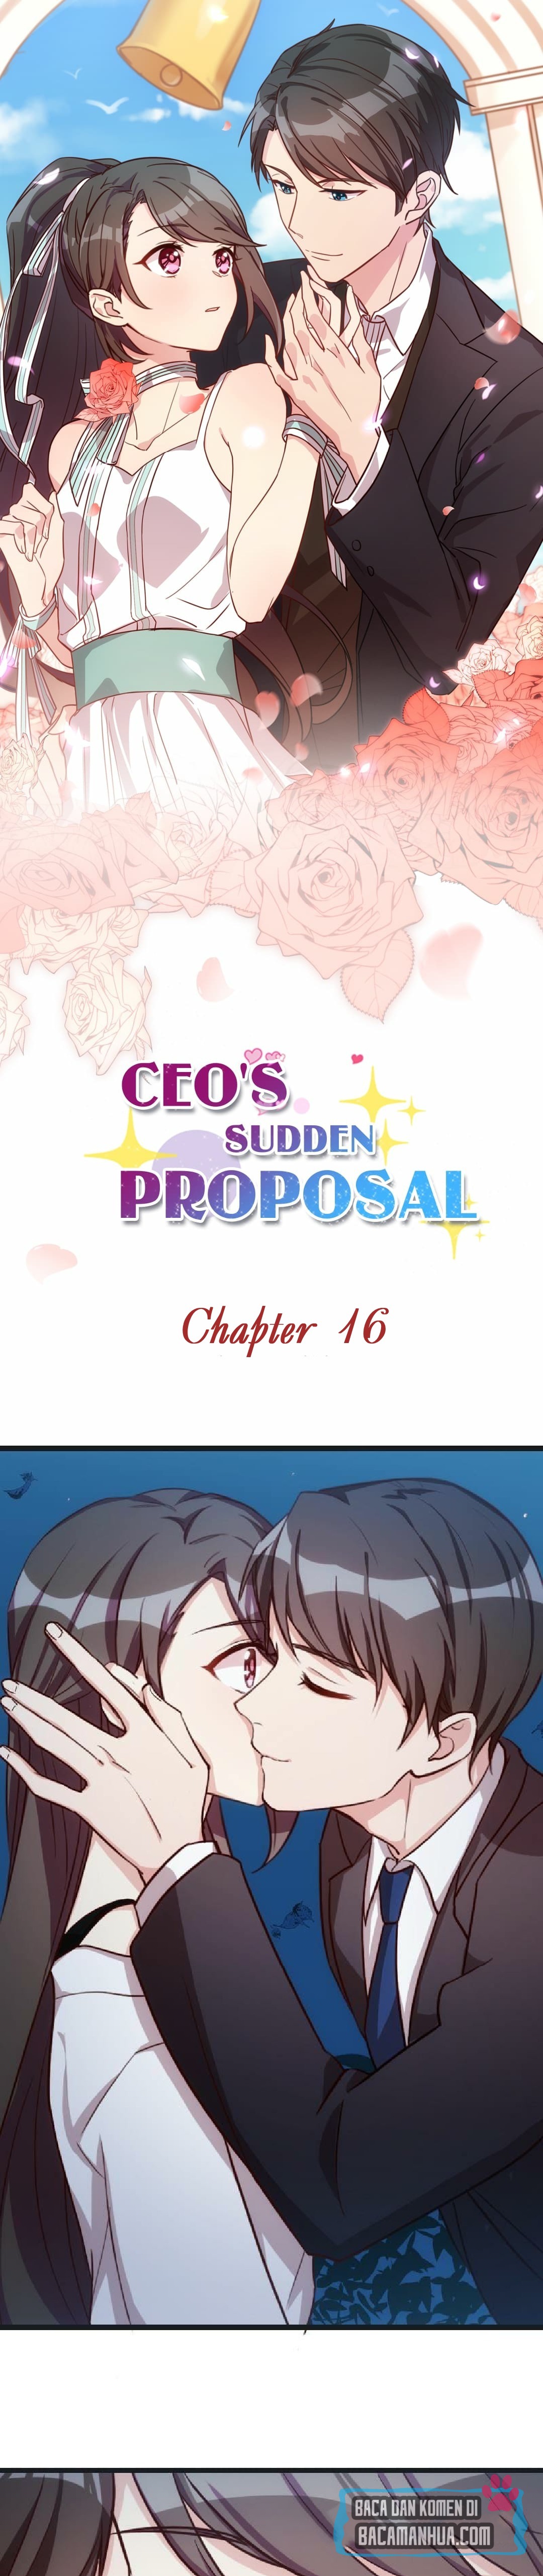 CEO’s Sudden Proposal Chapter 16 2